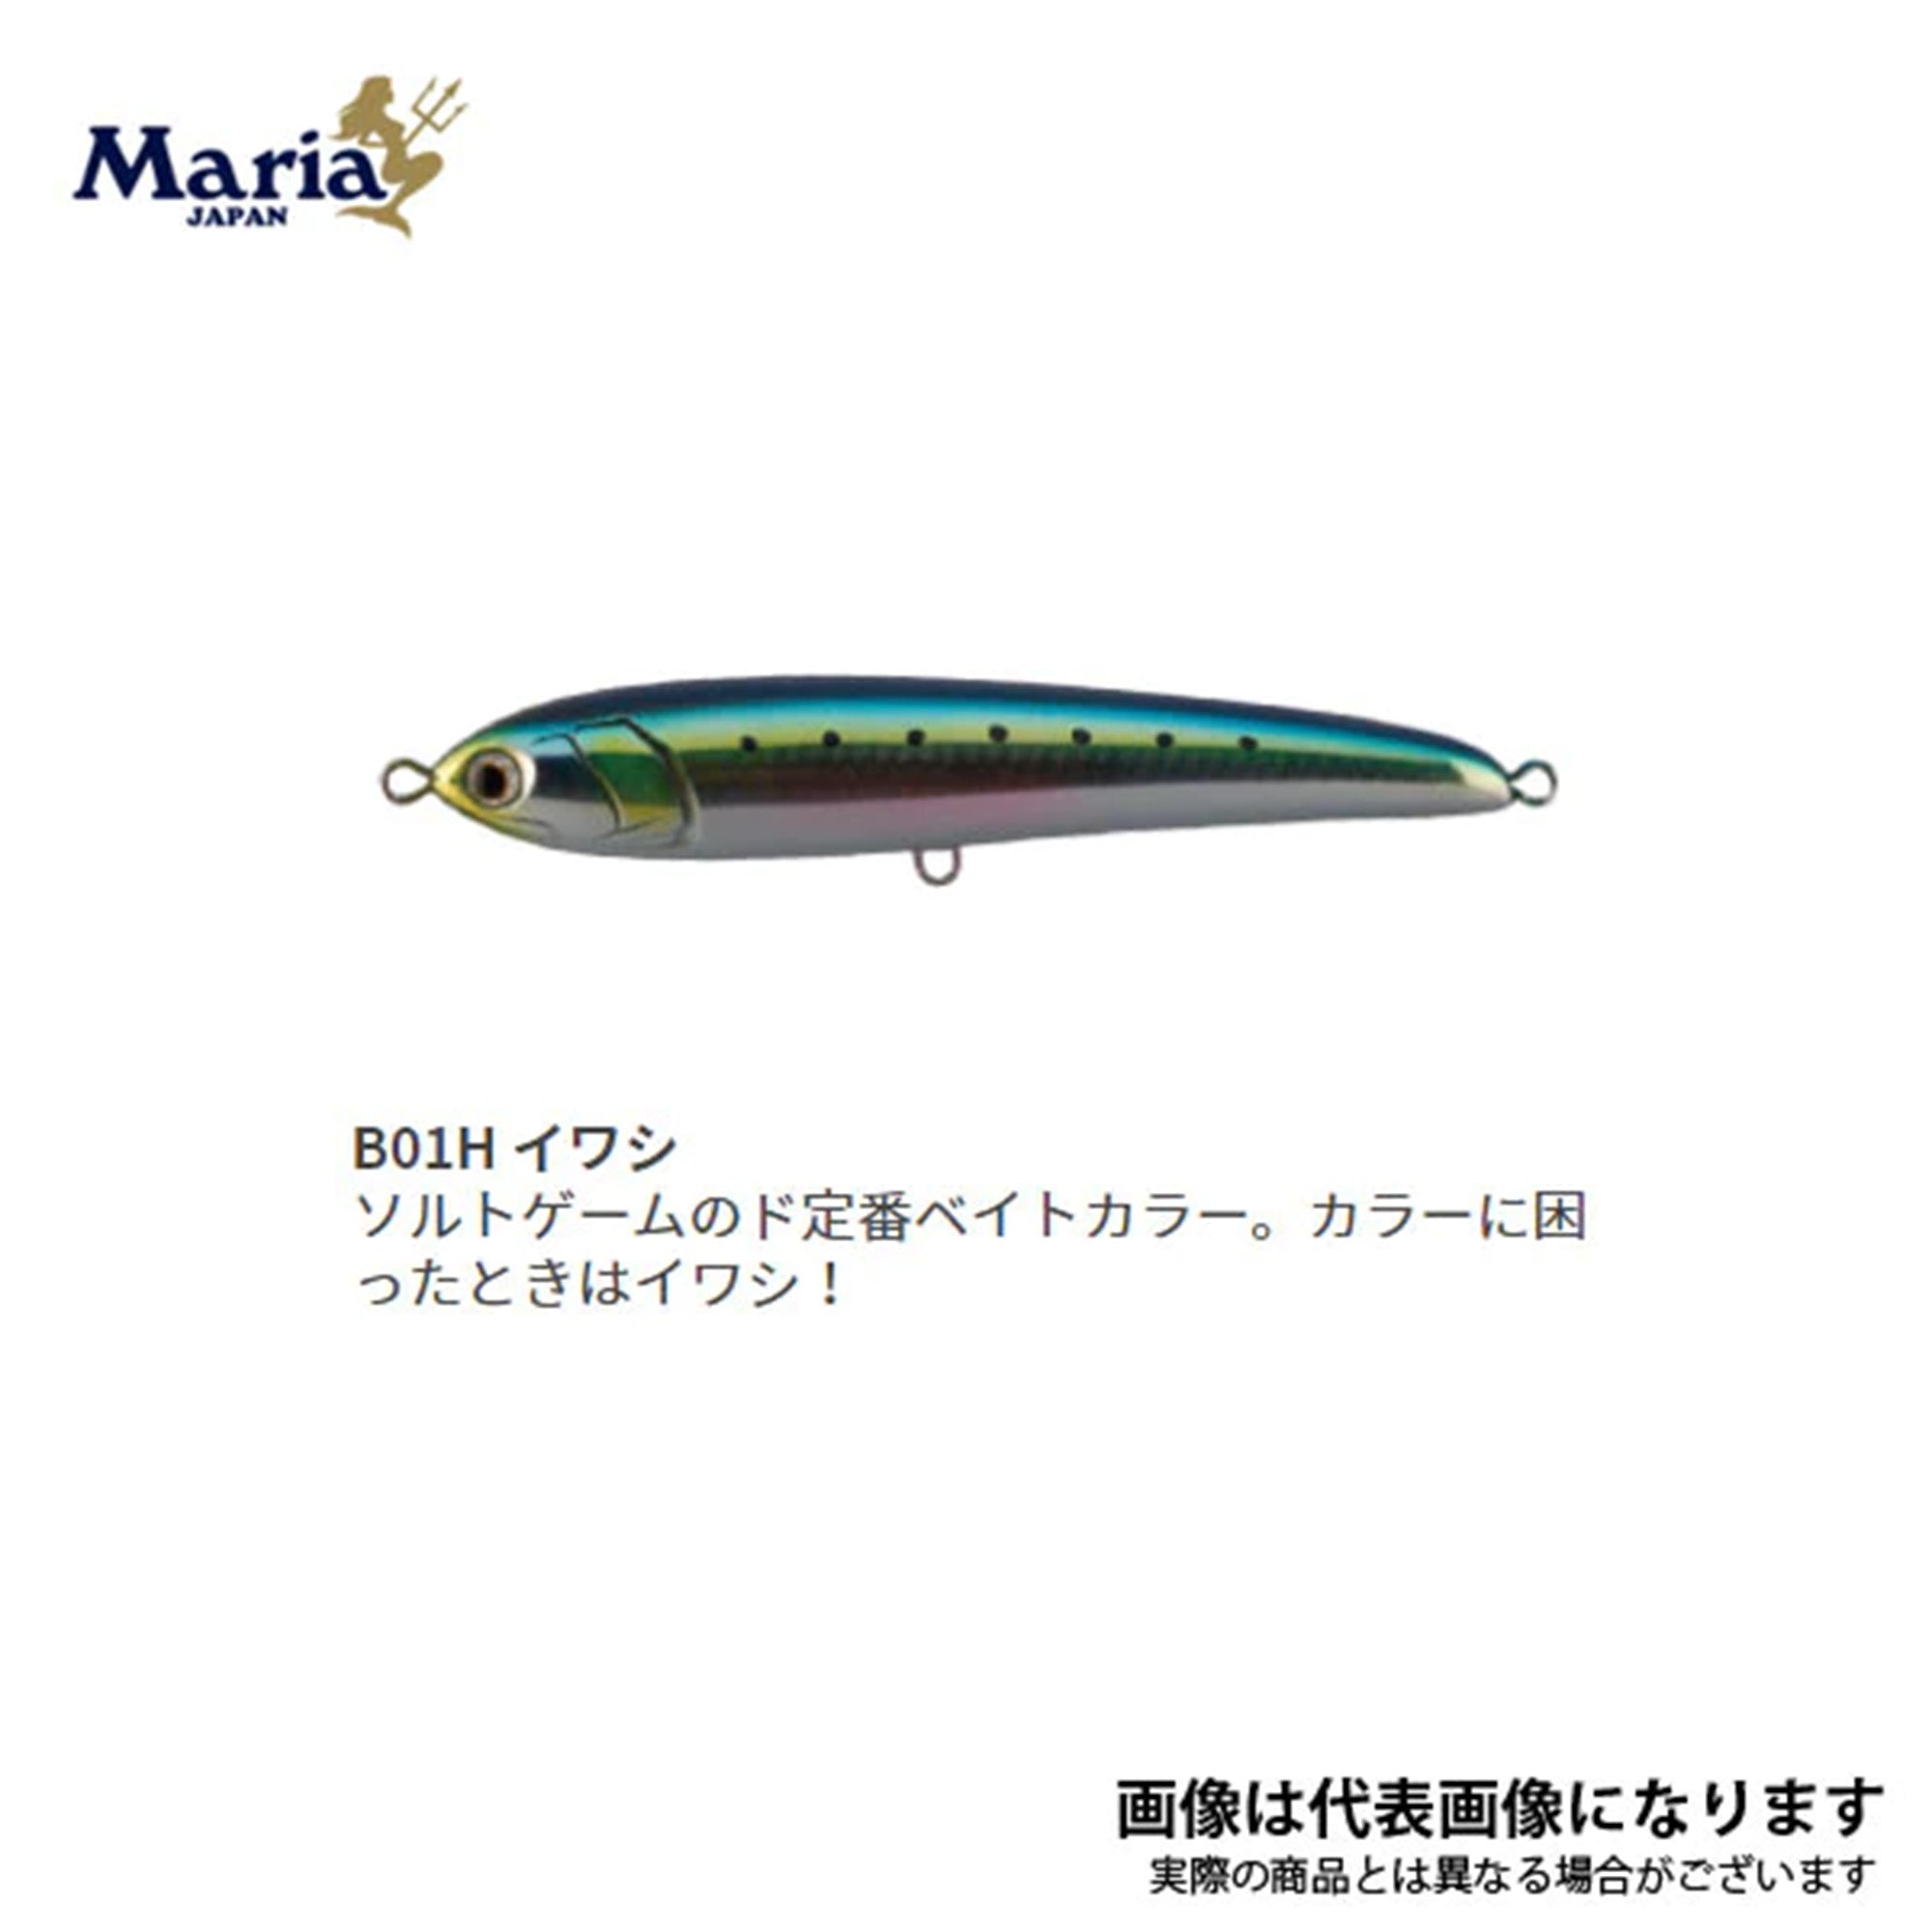 Maria/ラピード F160 – SEASAW-ONLINE